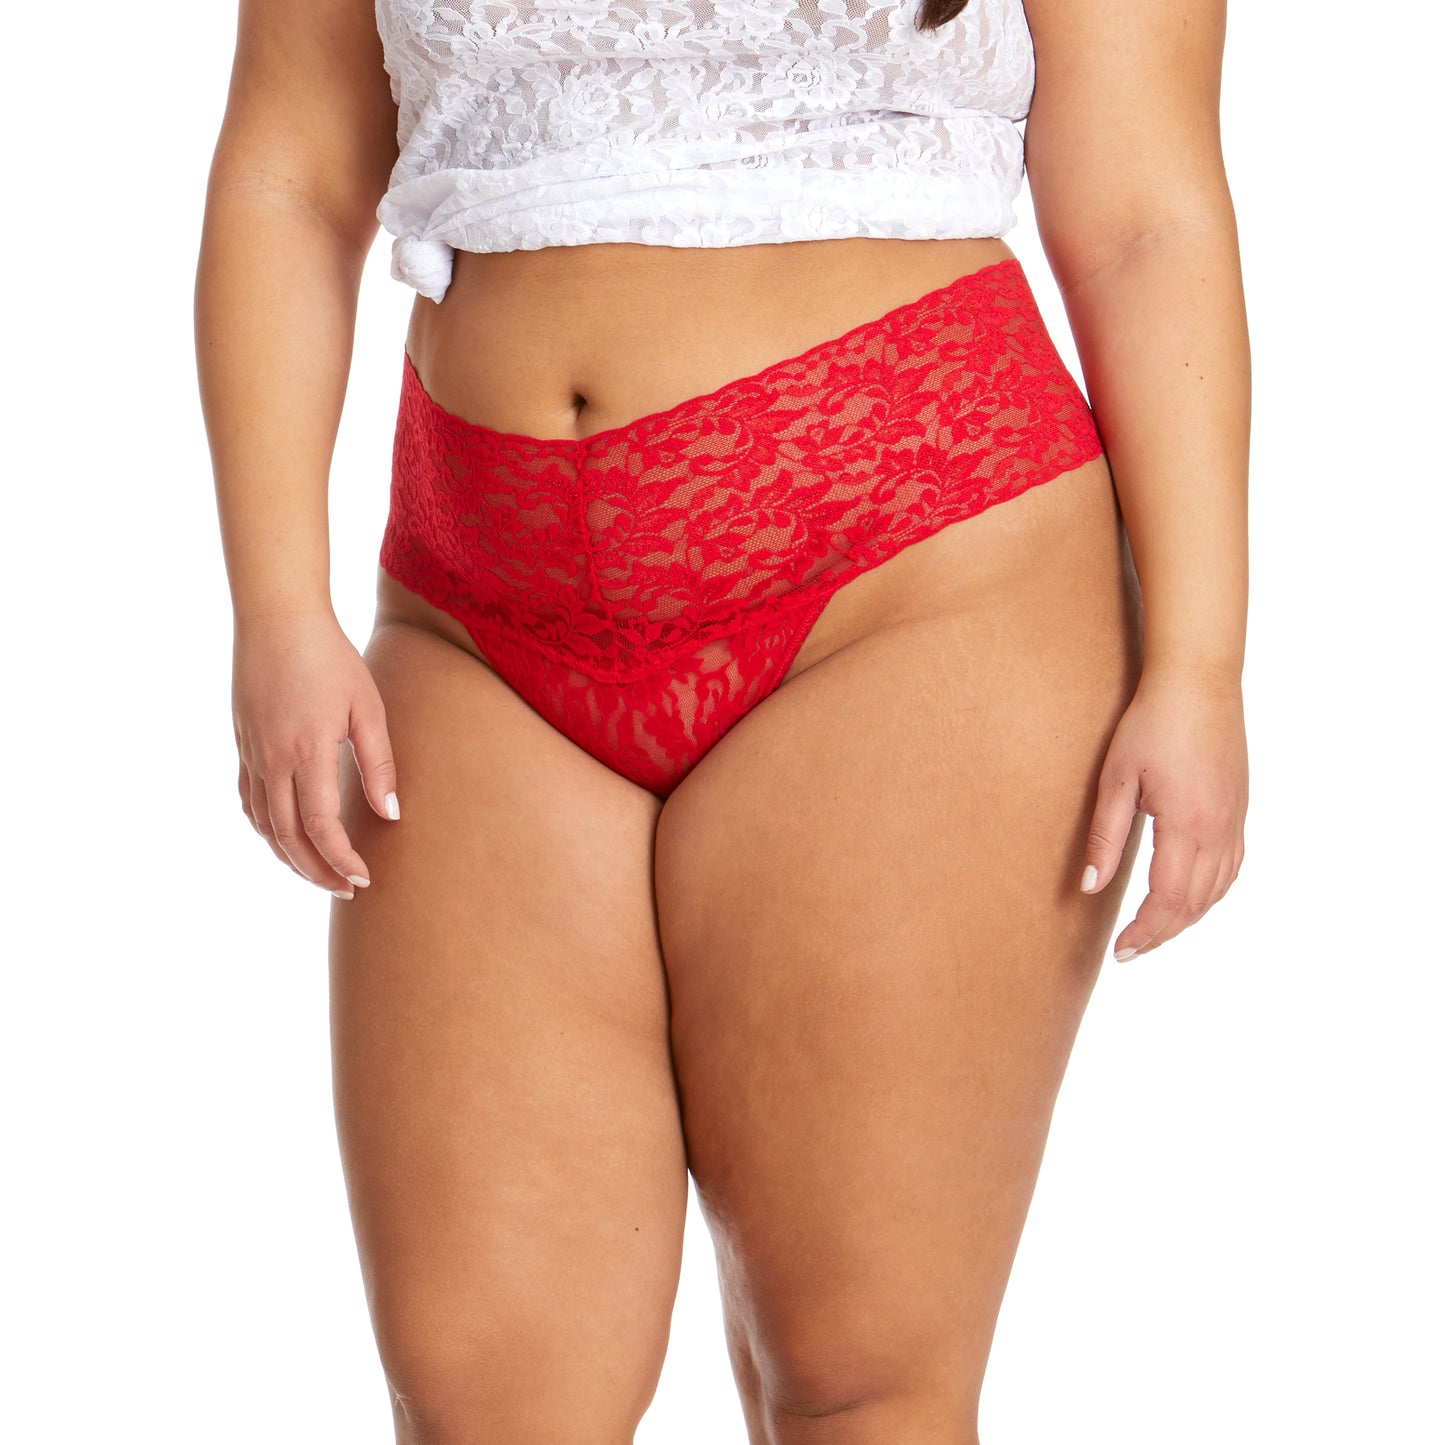 Hanky Panky Plus Retro Thong Red worn by model front view